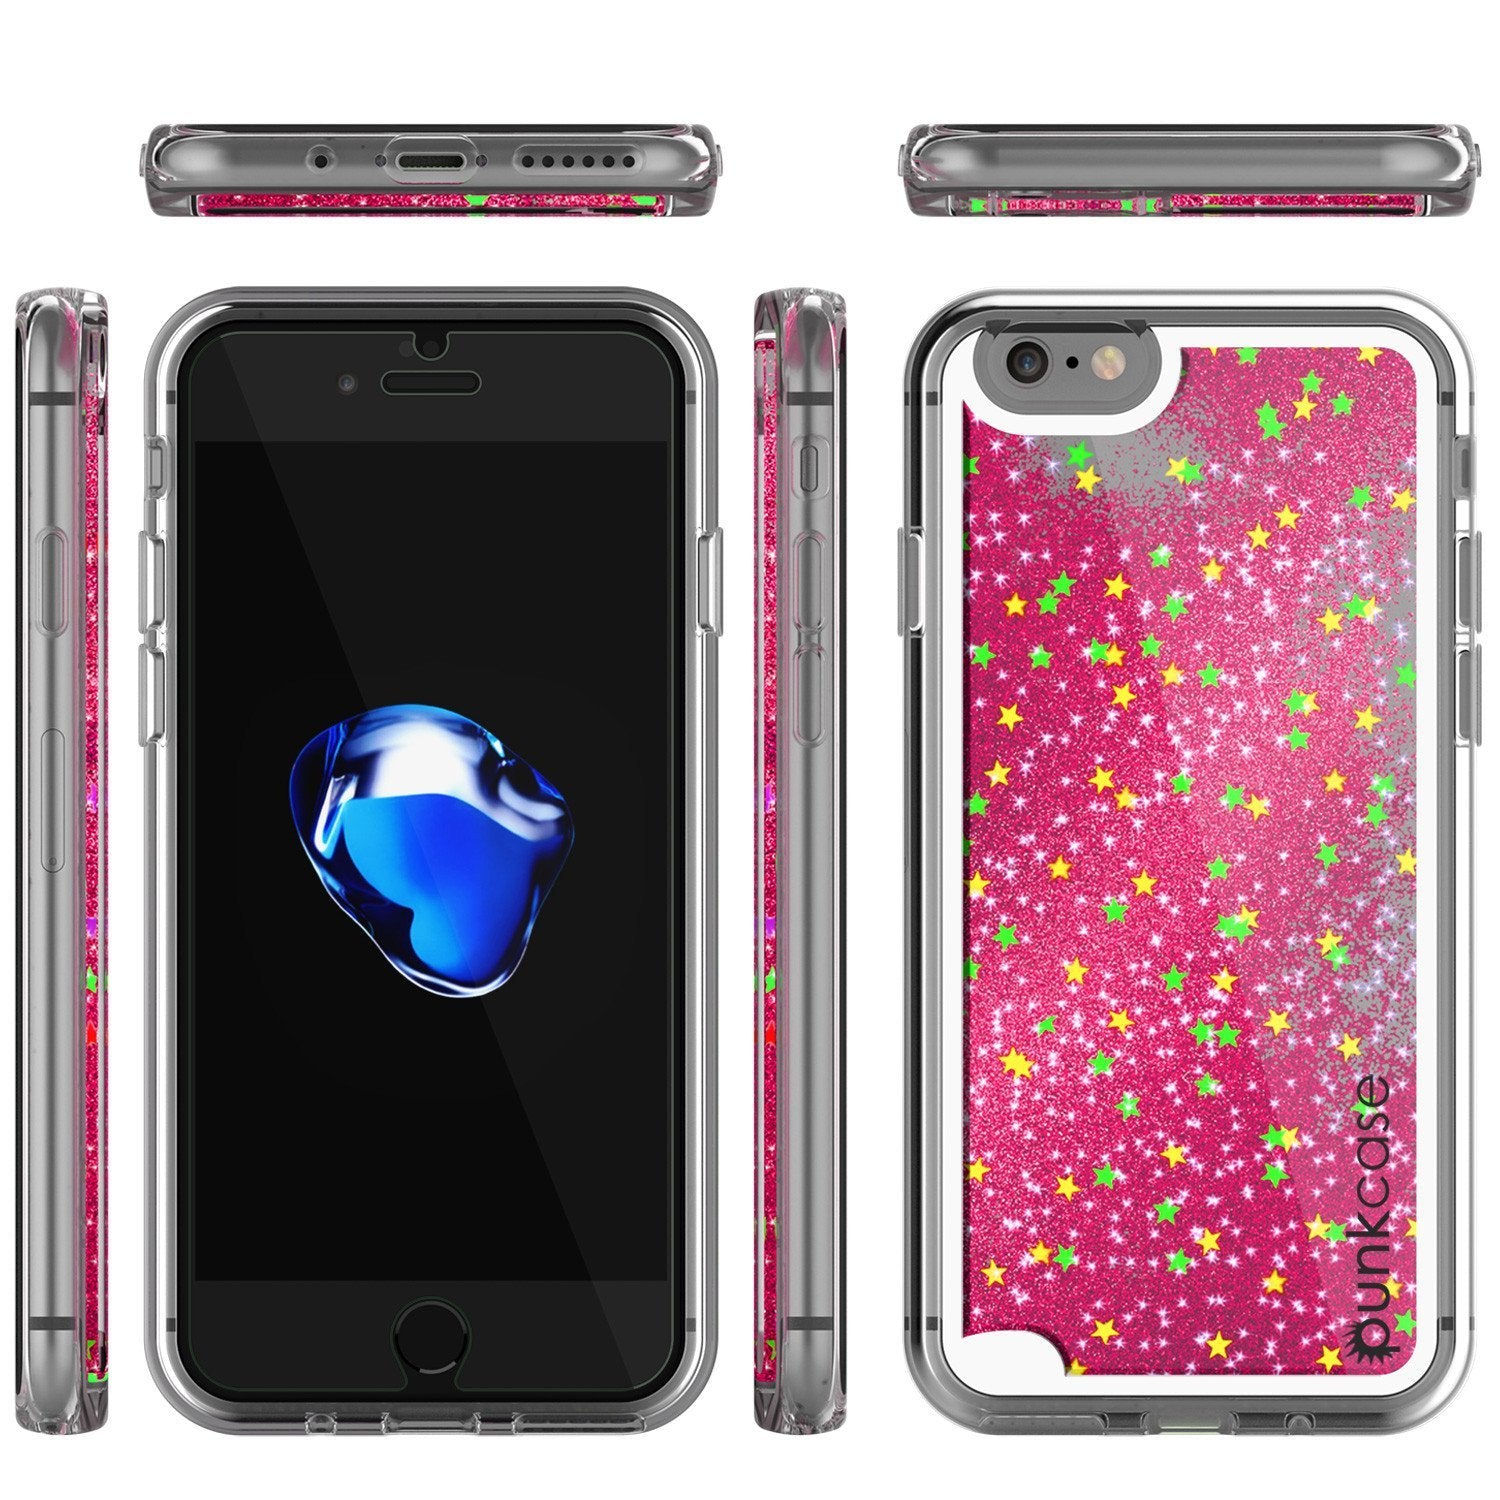 iPhone 8 Case, PunkCase LIQUID Pink Series, Protective Dual Layer Floating Glitter Cover - PunkCase NZ